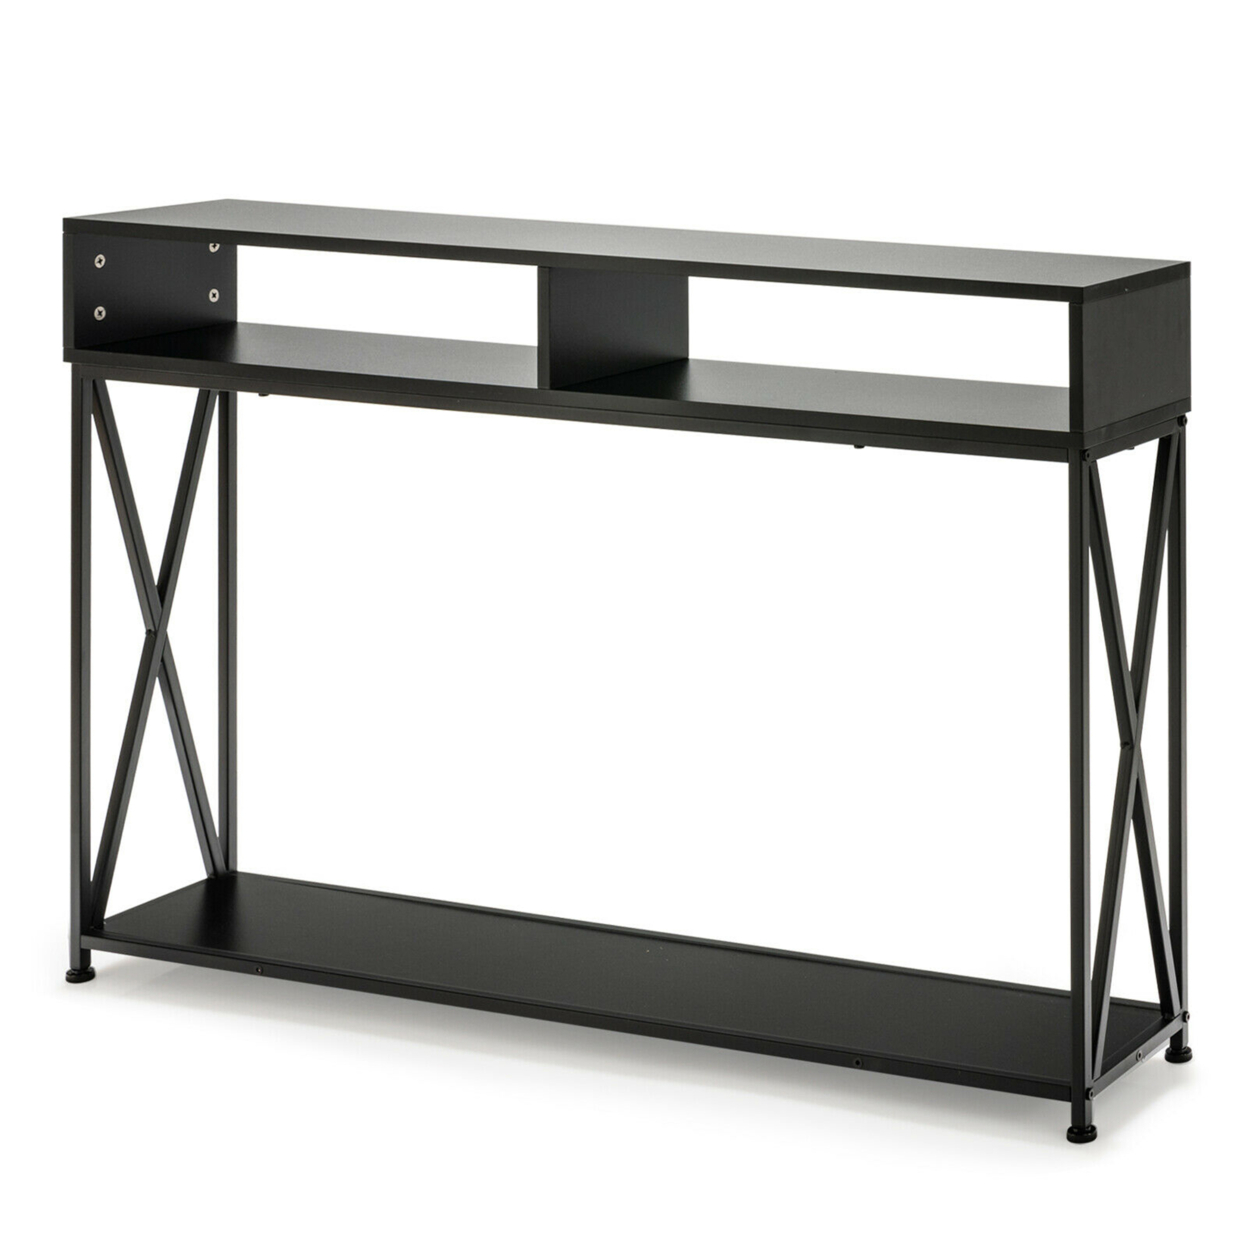 Console Table With Open Shelf And Storage Compartments Steel Frame - Black